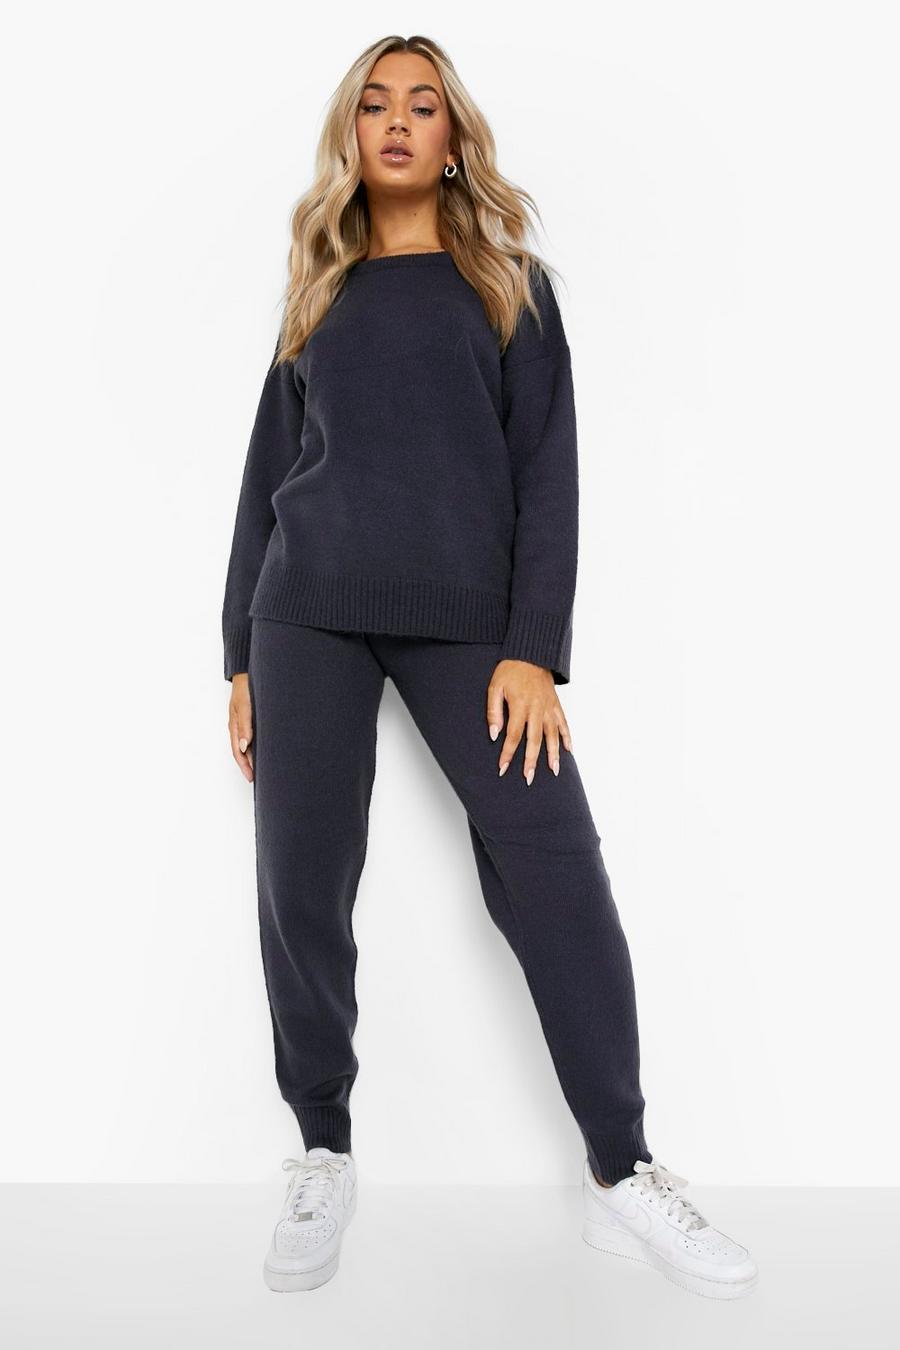 Slate grey Crew Neck Knitted Sweater Tracksuit image number 1